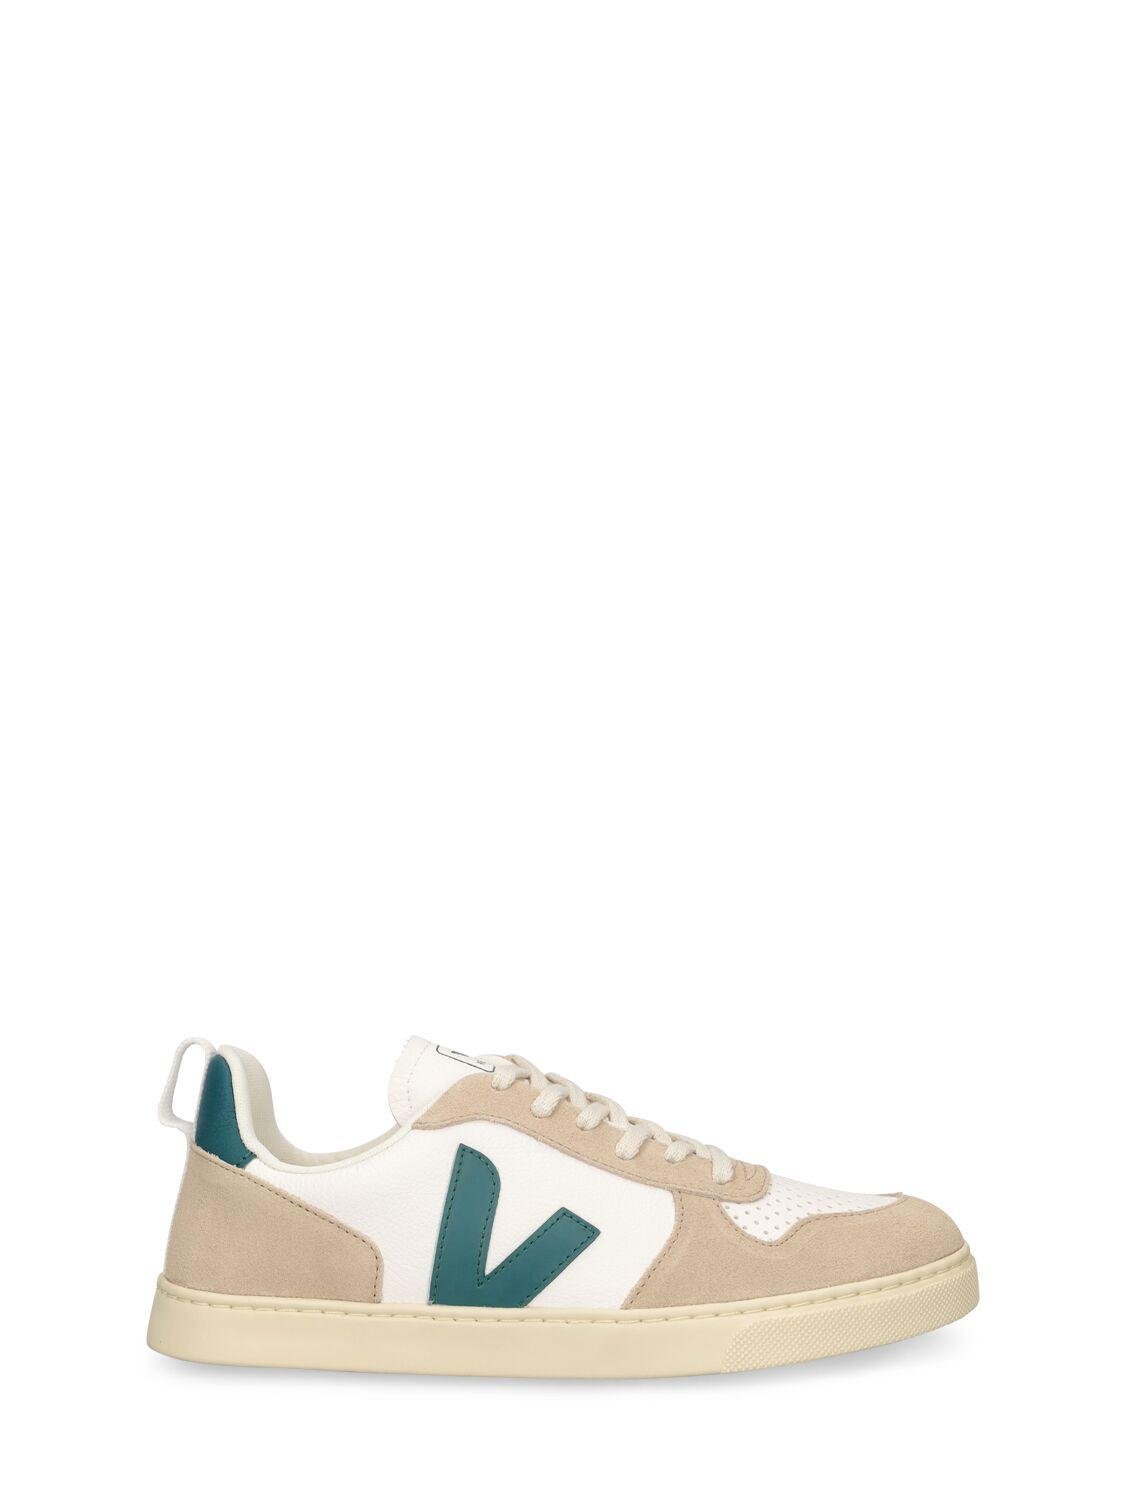 V-10 Suede Strap Sneakers by VEJA